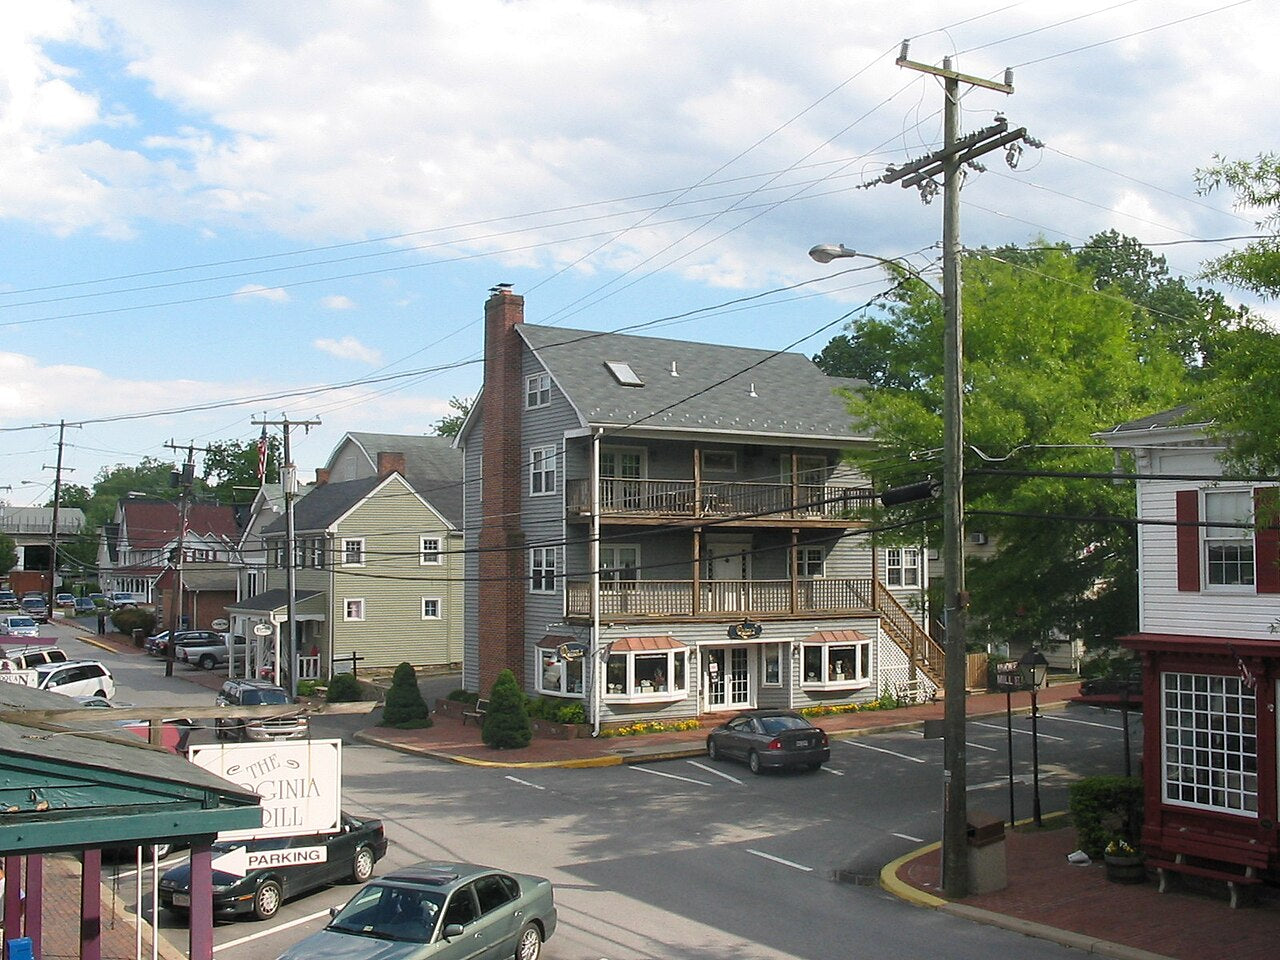 Haus and Hues in Occoquan